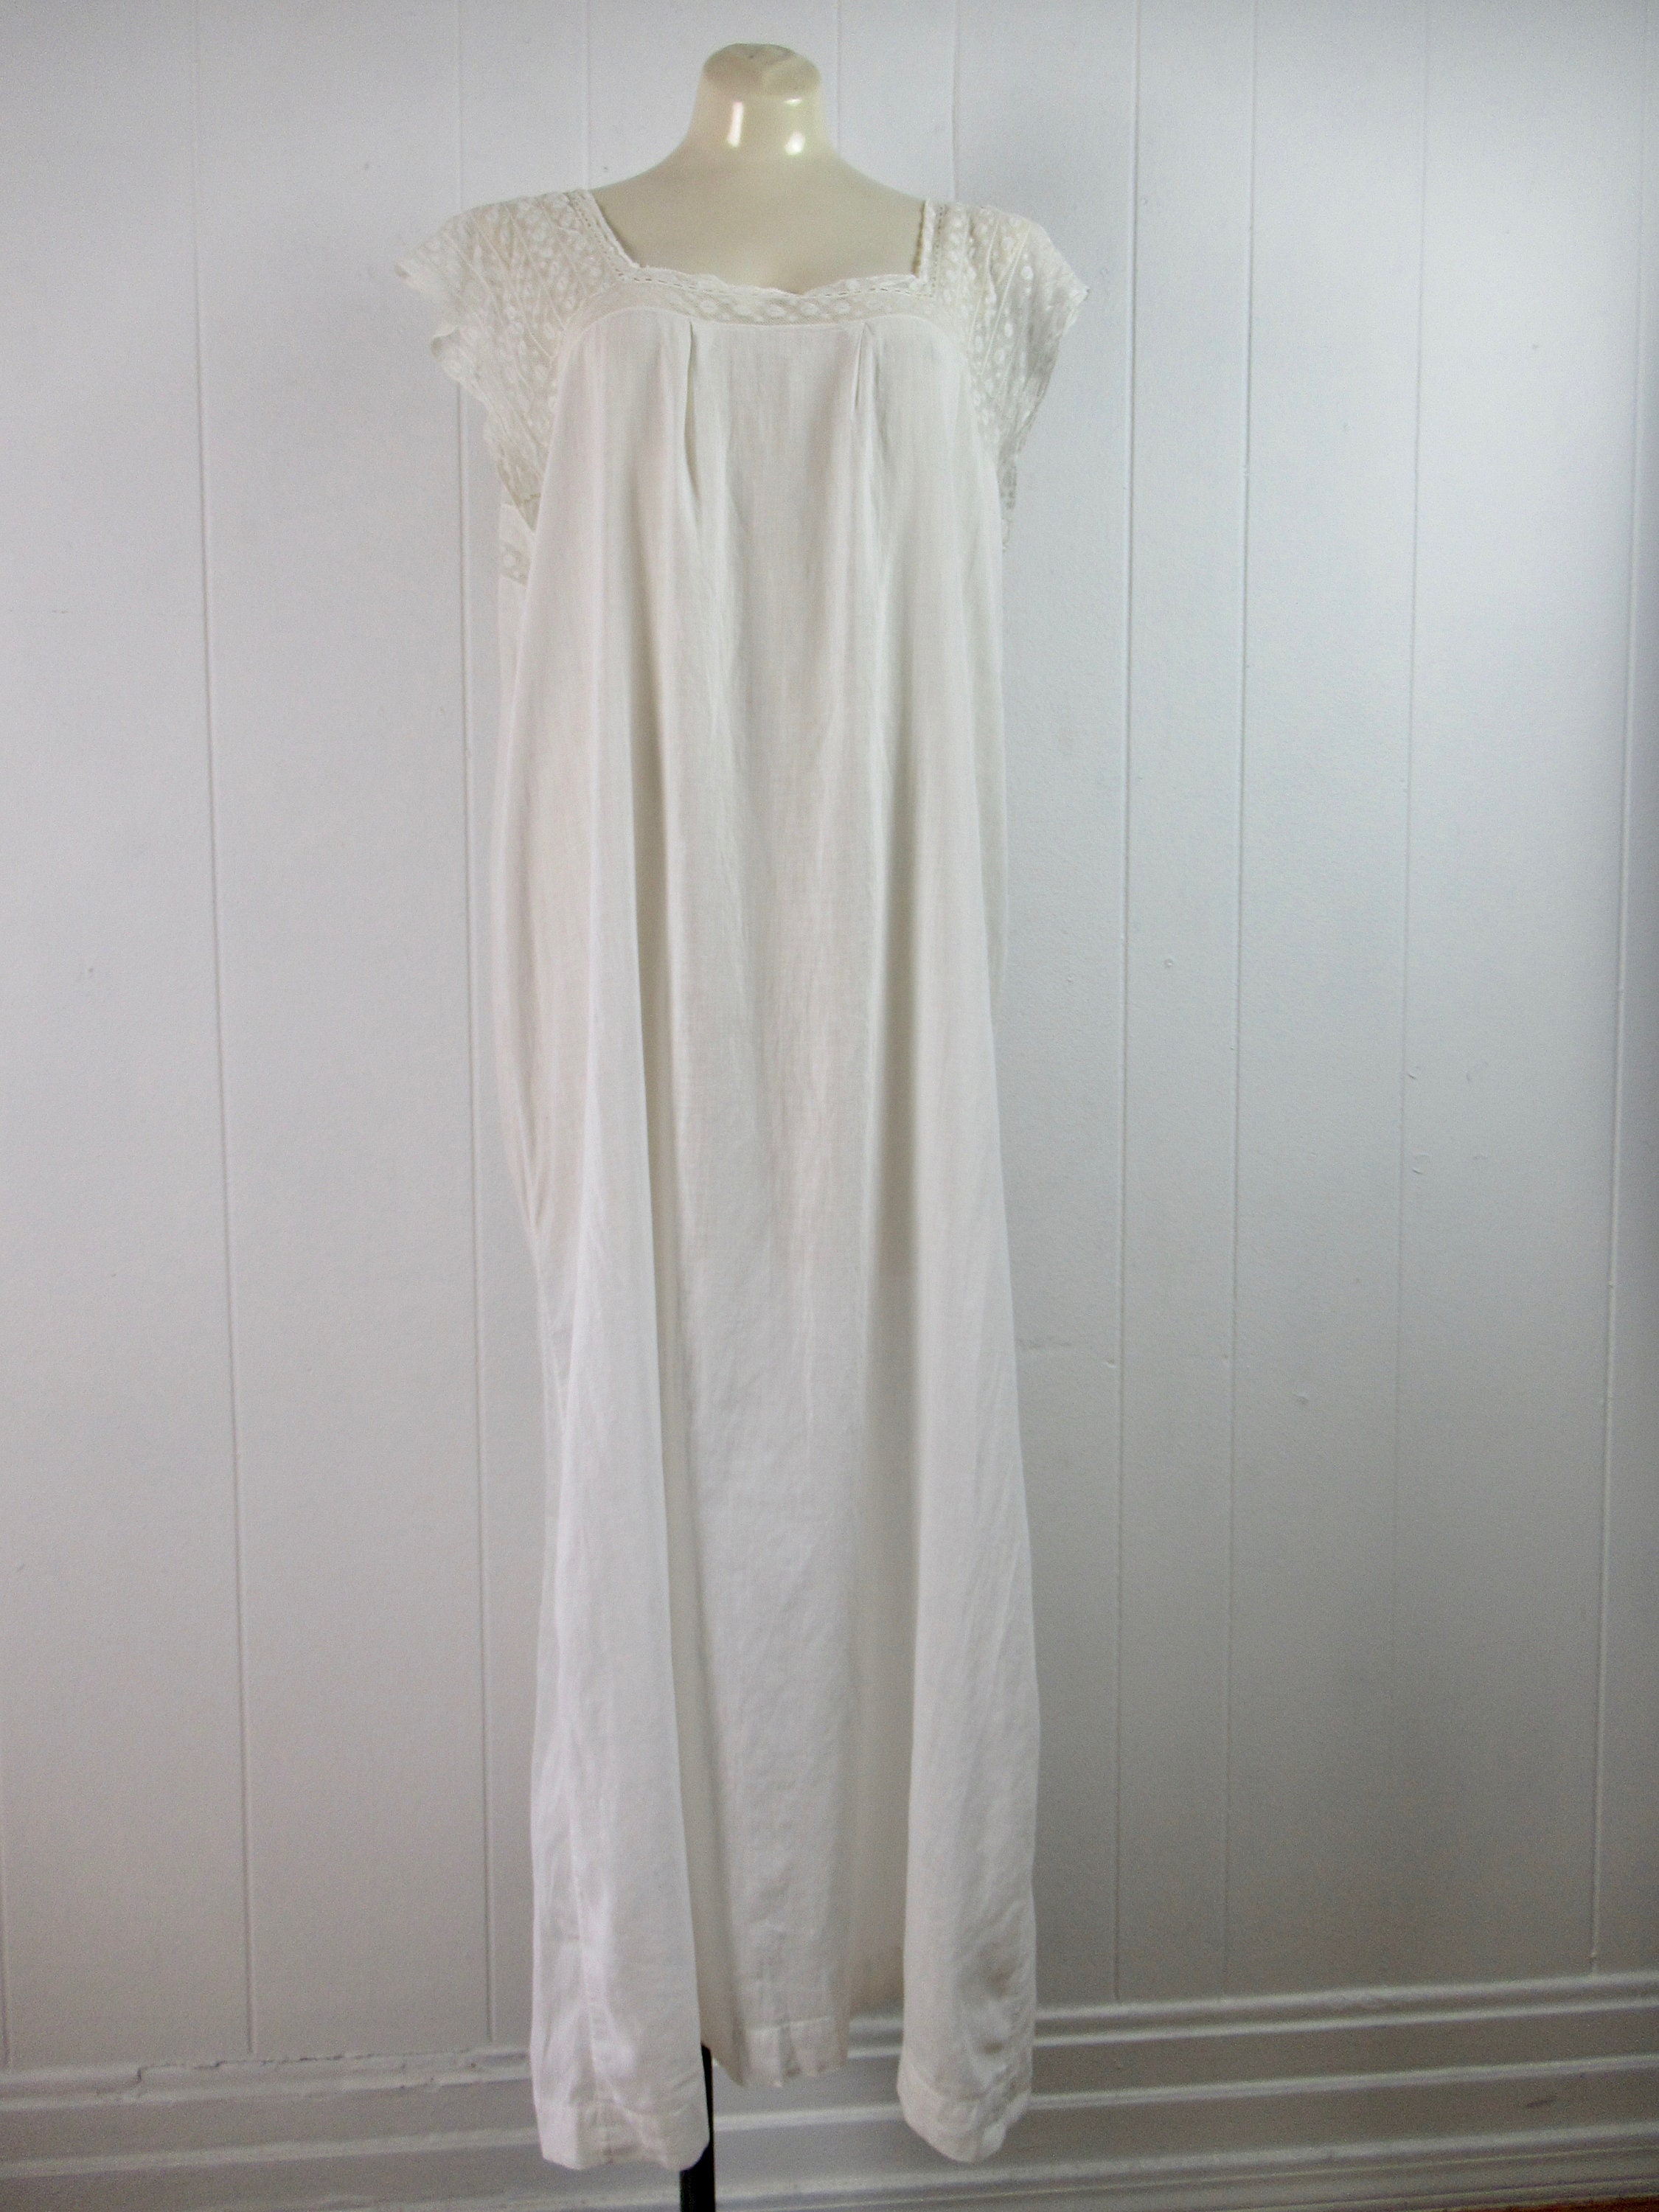 Vintage Dress 1910s Dress Dressing Gown Nightgown Lace - Etsy